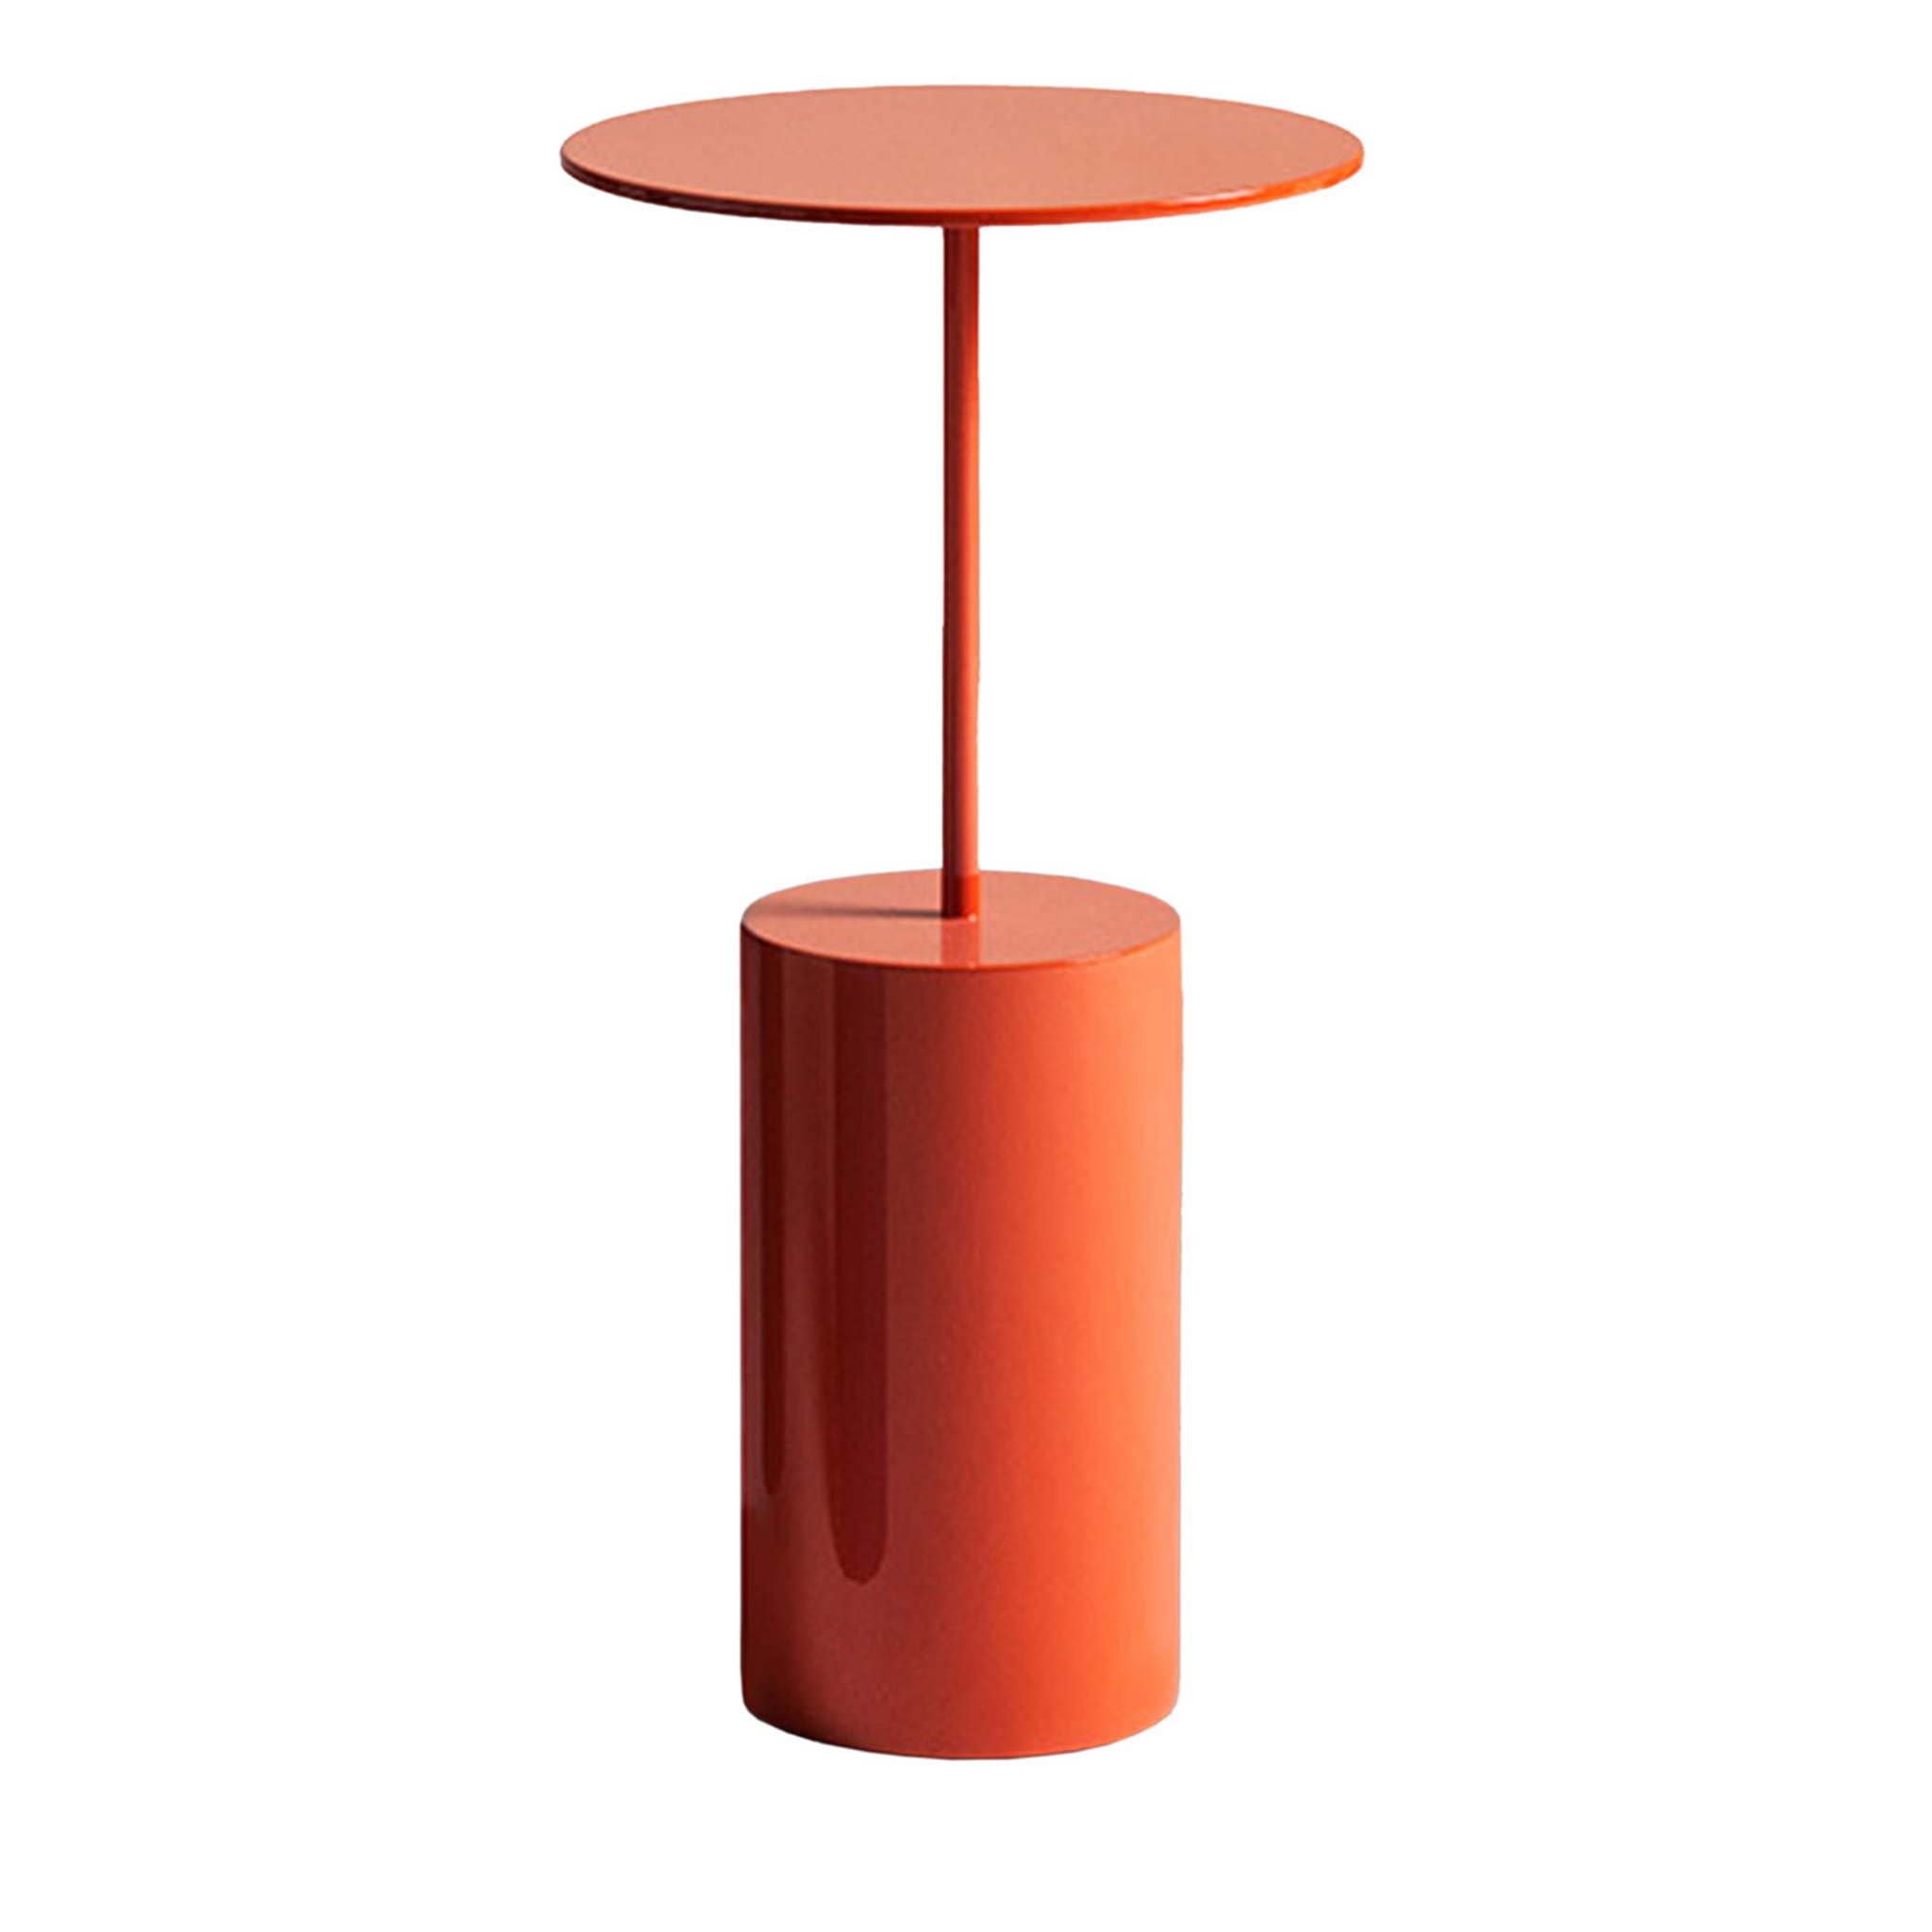 Cocktail Round Orange Side Table by Angeletti Ruzza - Main view